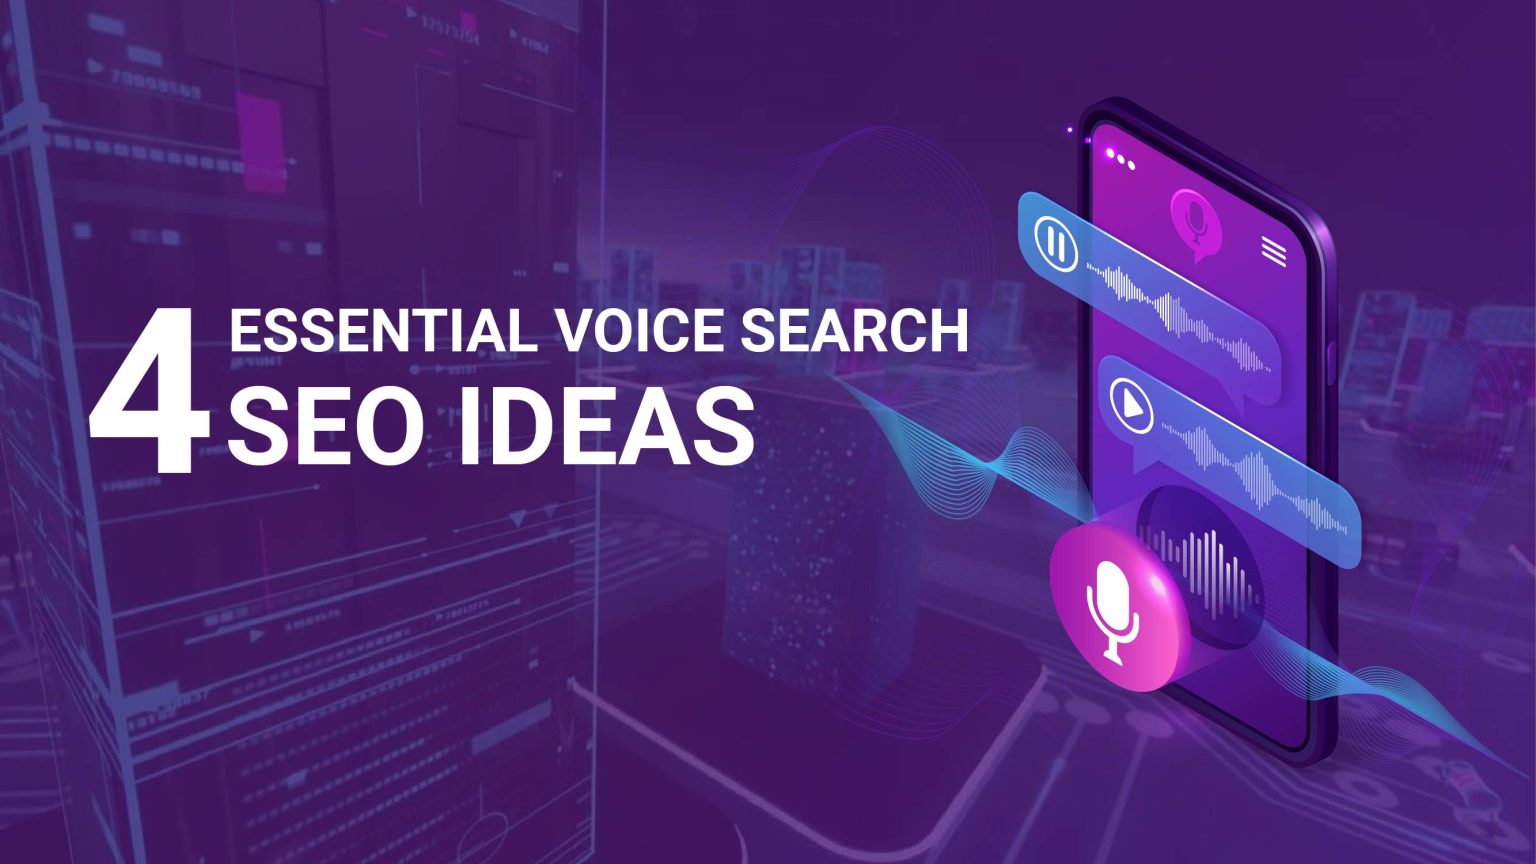 4-Essential-Voice-Search-SEO-Ideas-to-Help-you-Improve-Your-Content-1536x864